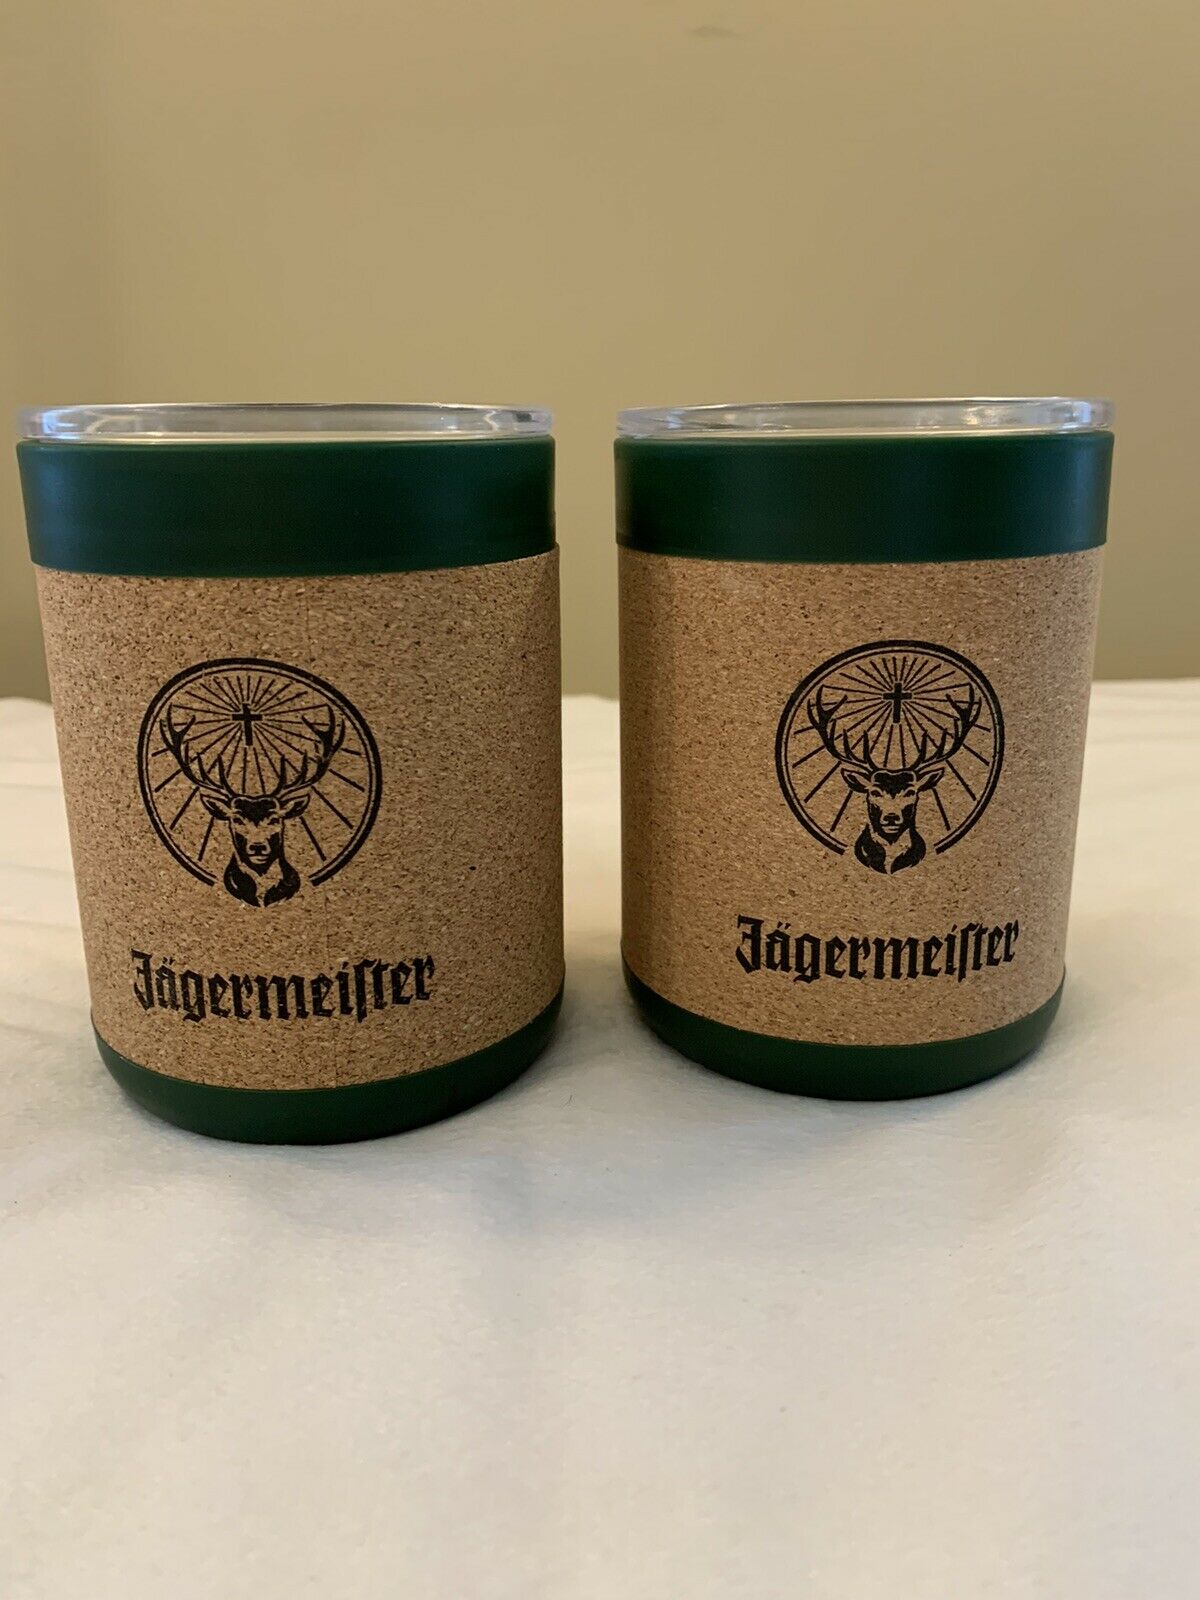 Jagermeister 2 Approx 8 Oz Insulated Cup W Lid And Cork Jaegermeister Barware